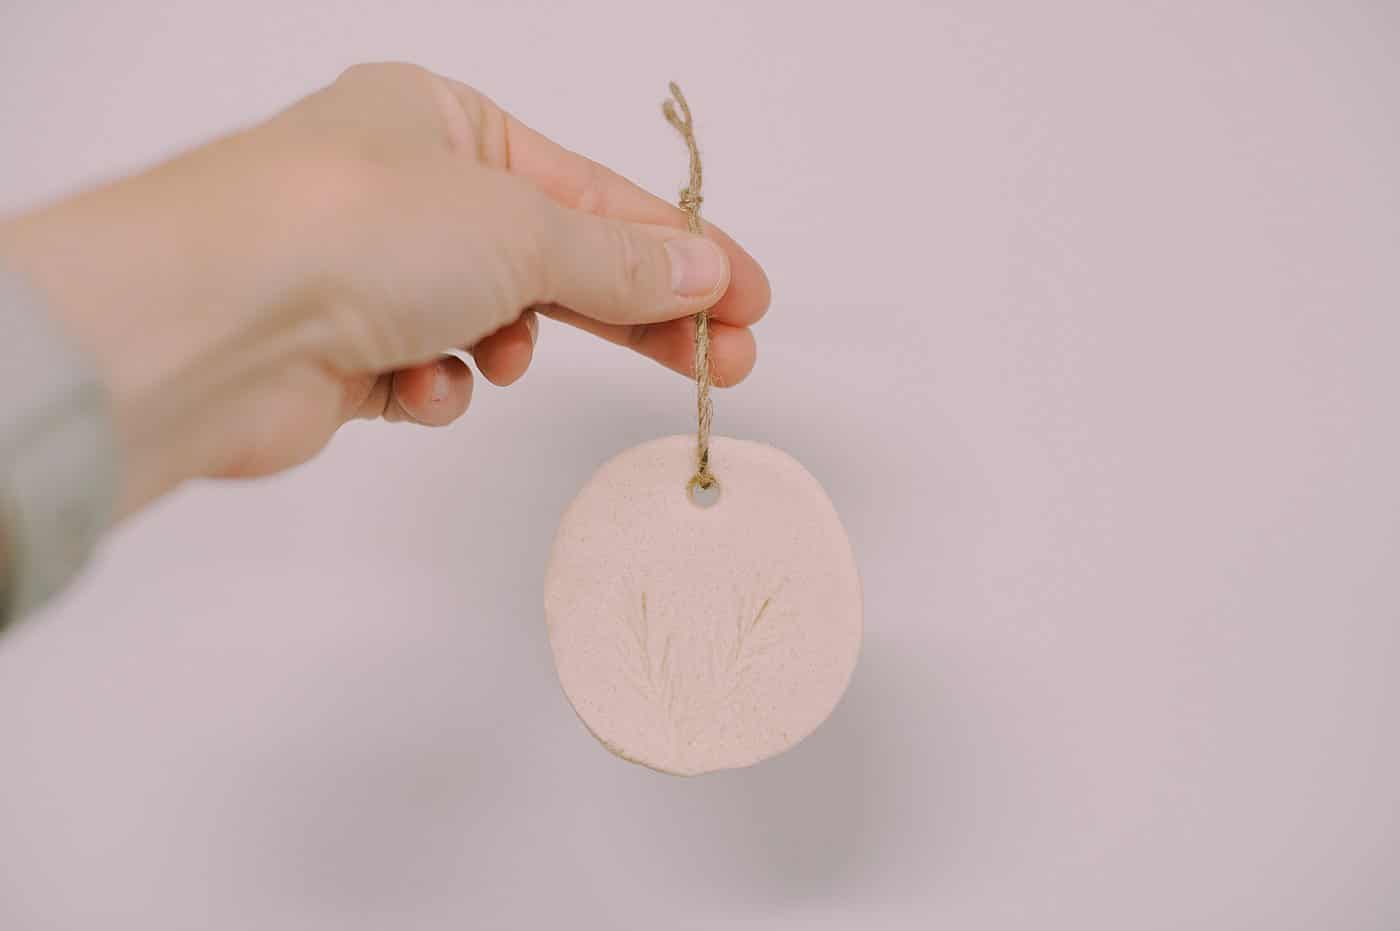 DIY salt dough ornaments with pine needles pressed into them for a pine design embellishment.